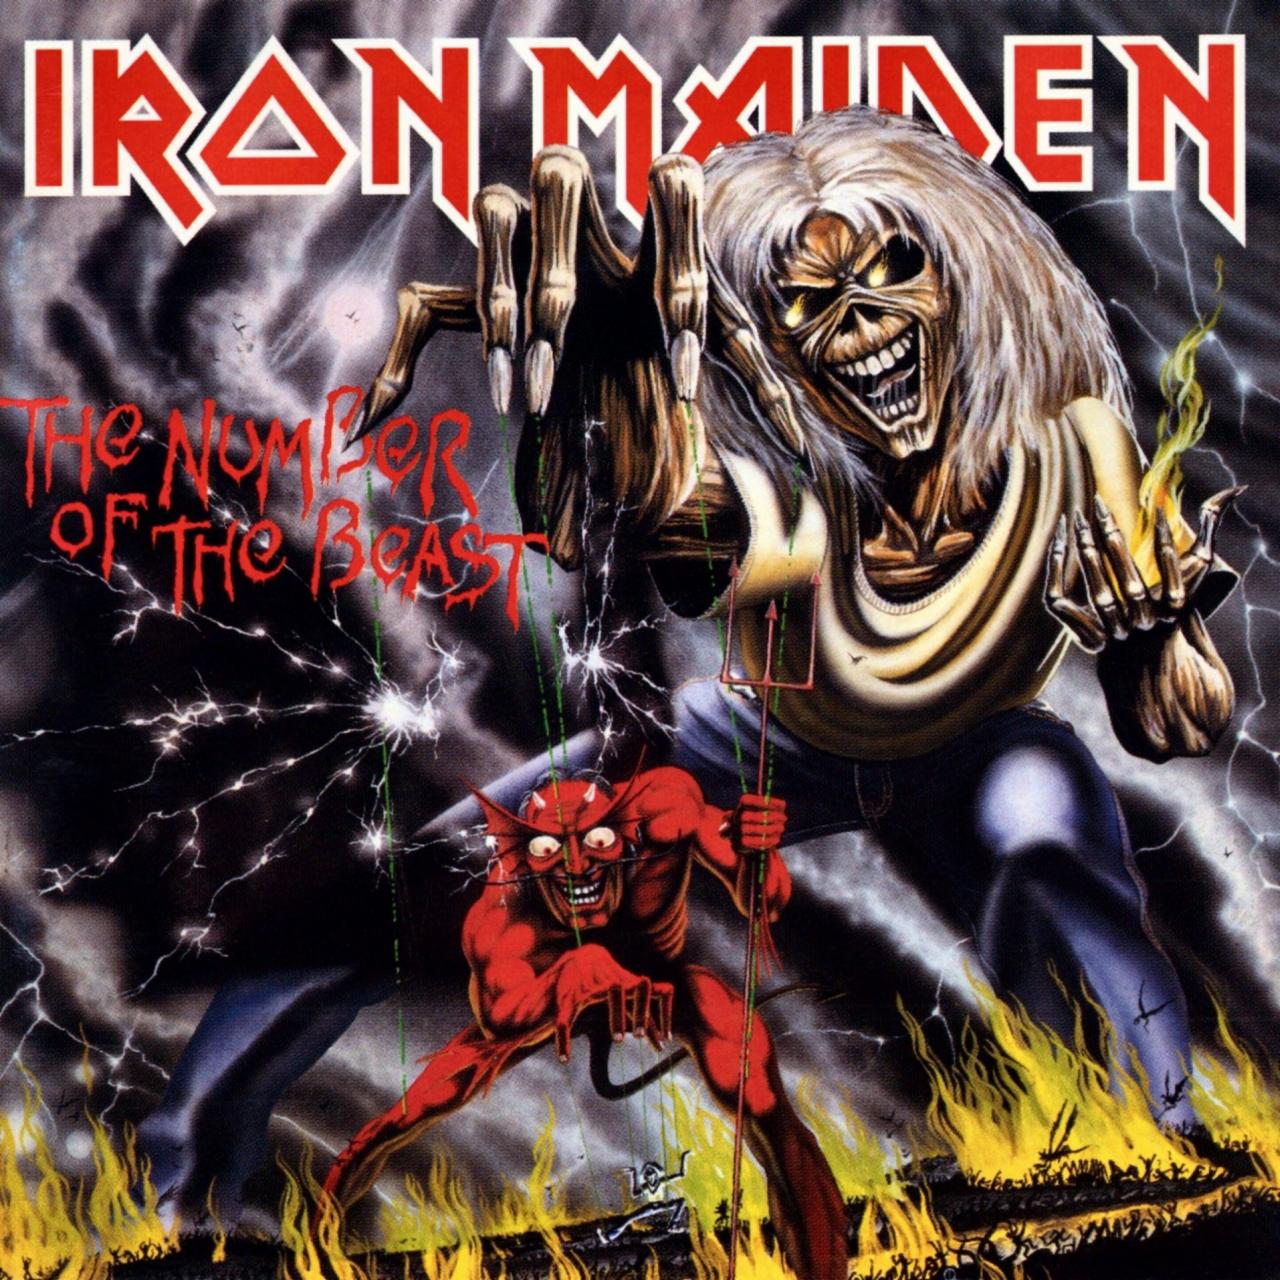 Iron+Maiden+-+The+Number+of+the+Beast+(1982).jpg